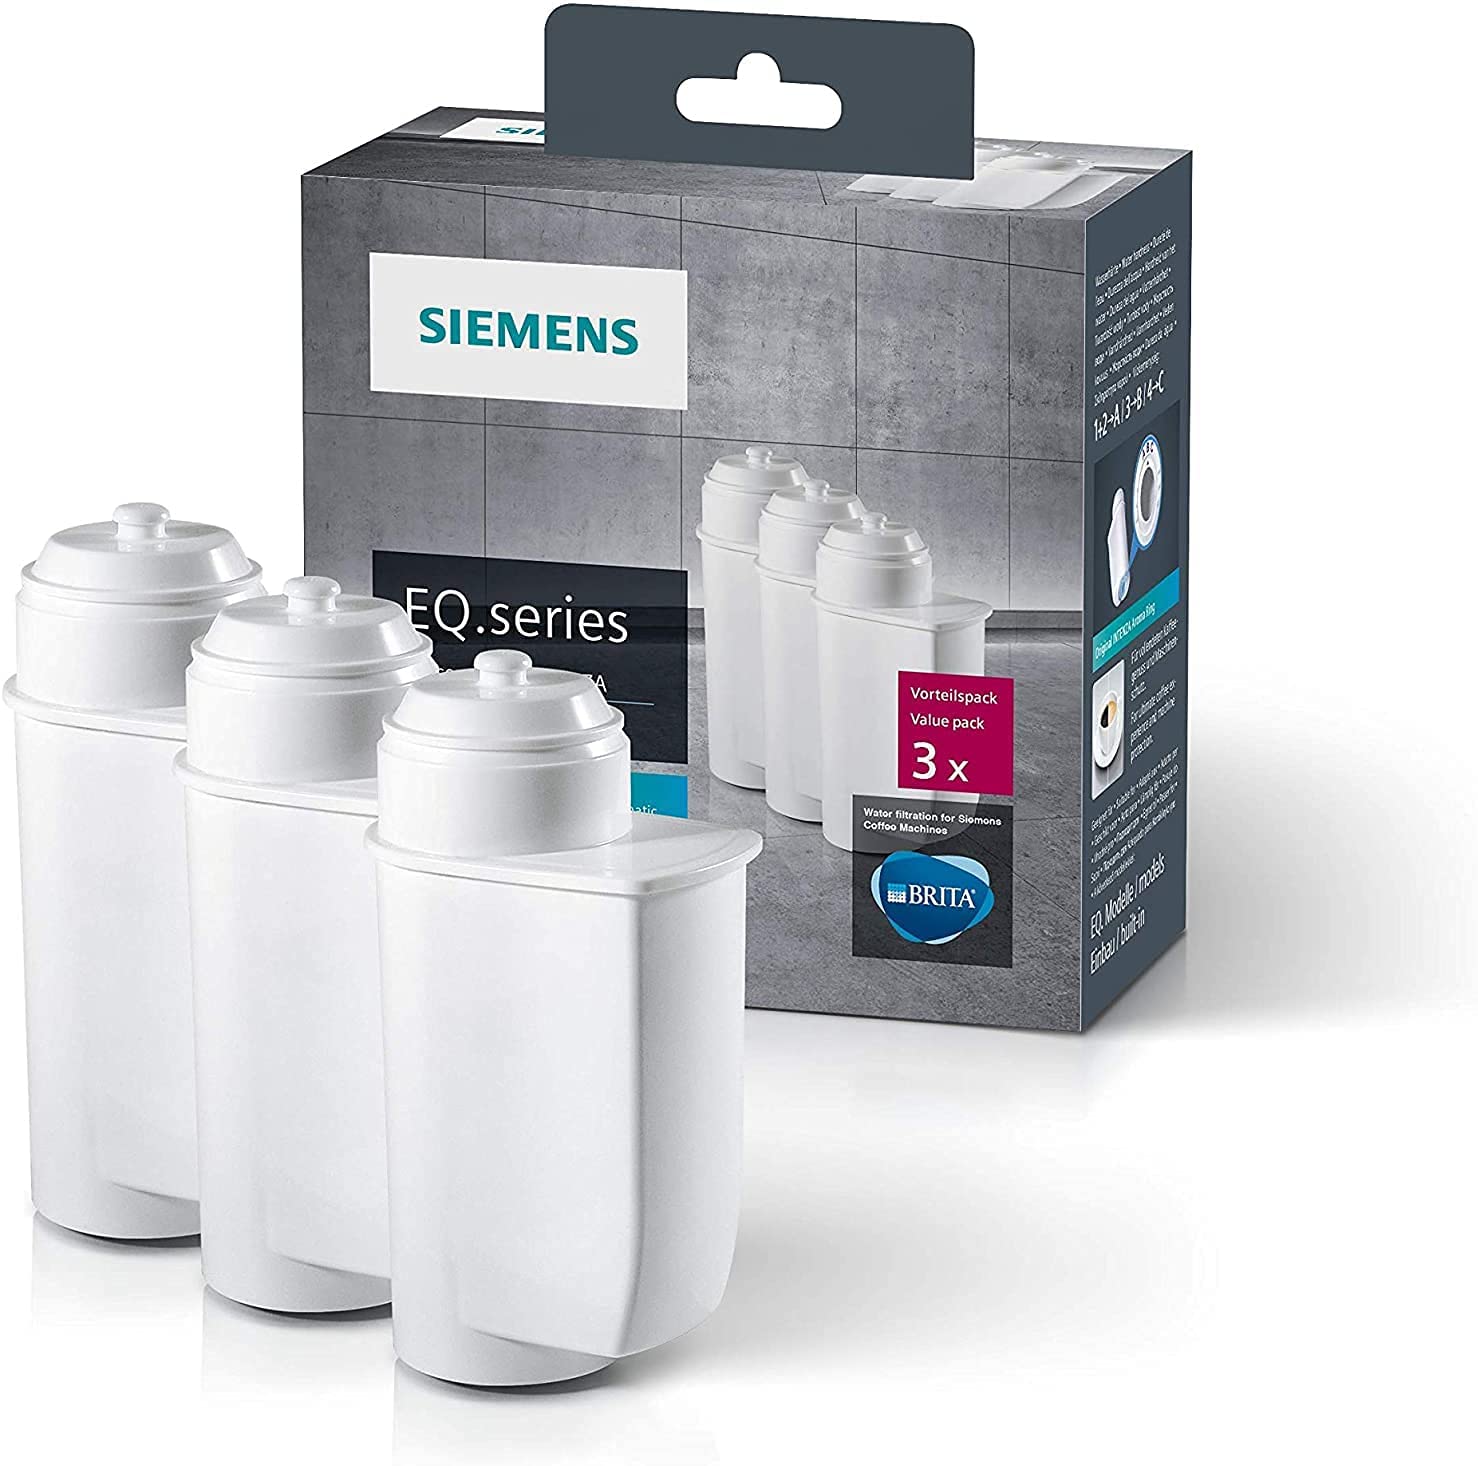 Siemens BRITA Intenza TZ70033 Water Filter, Pack of 3, Reduces Limescale Content of Water, Reduces Taste-Interrupting Substances, for EQ Series Coffee Machines, White